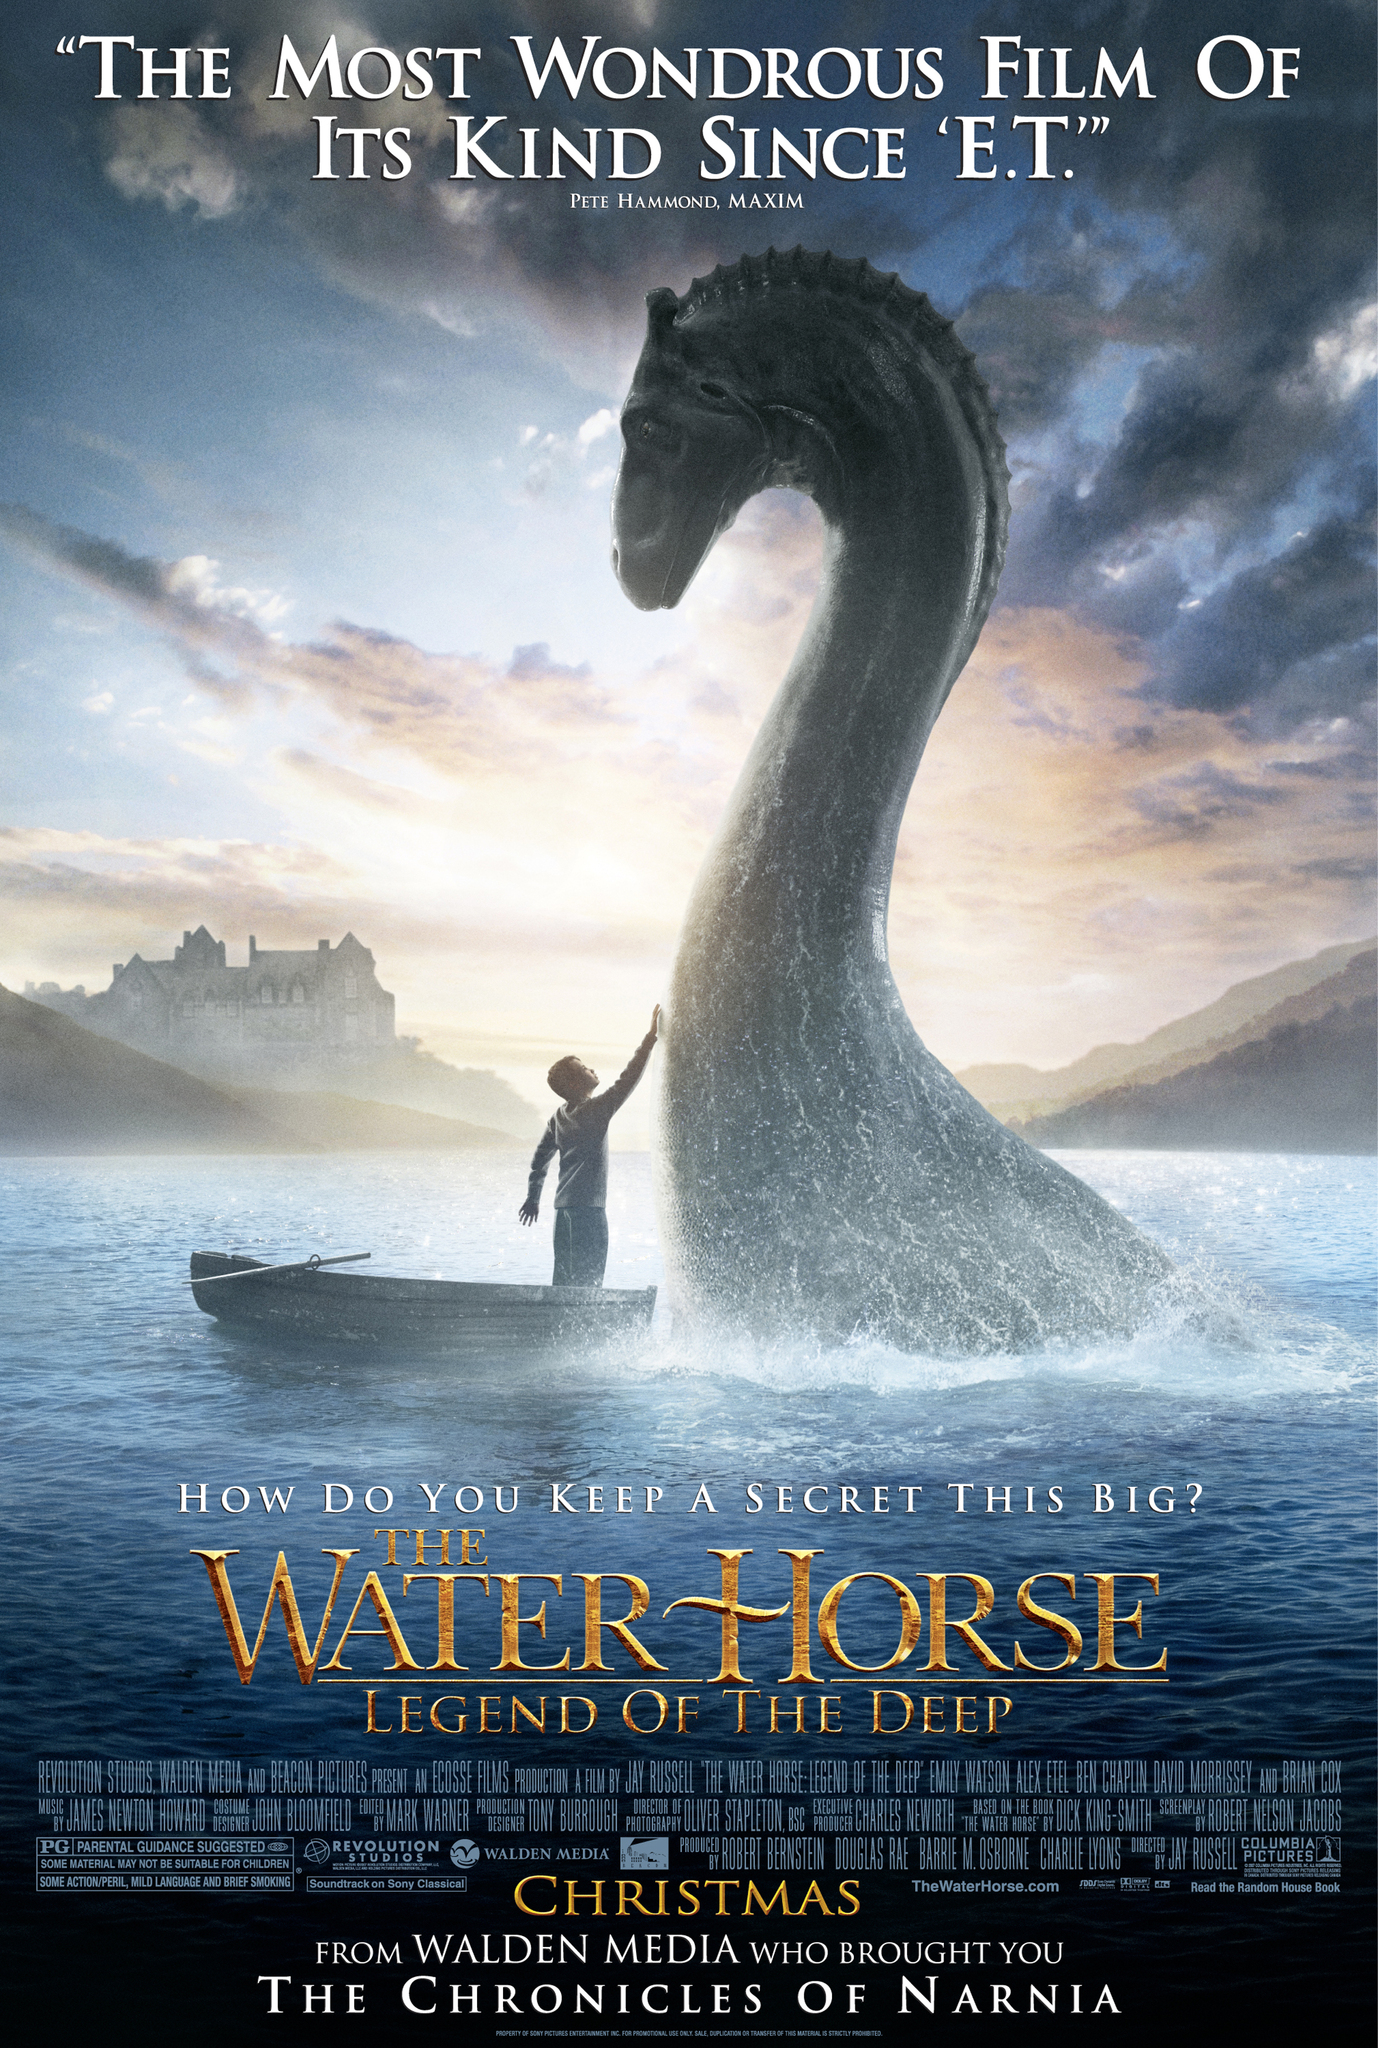 image for the water horse